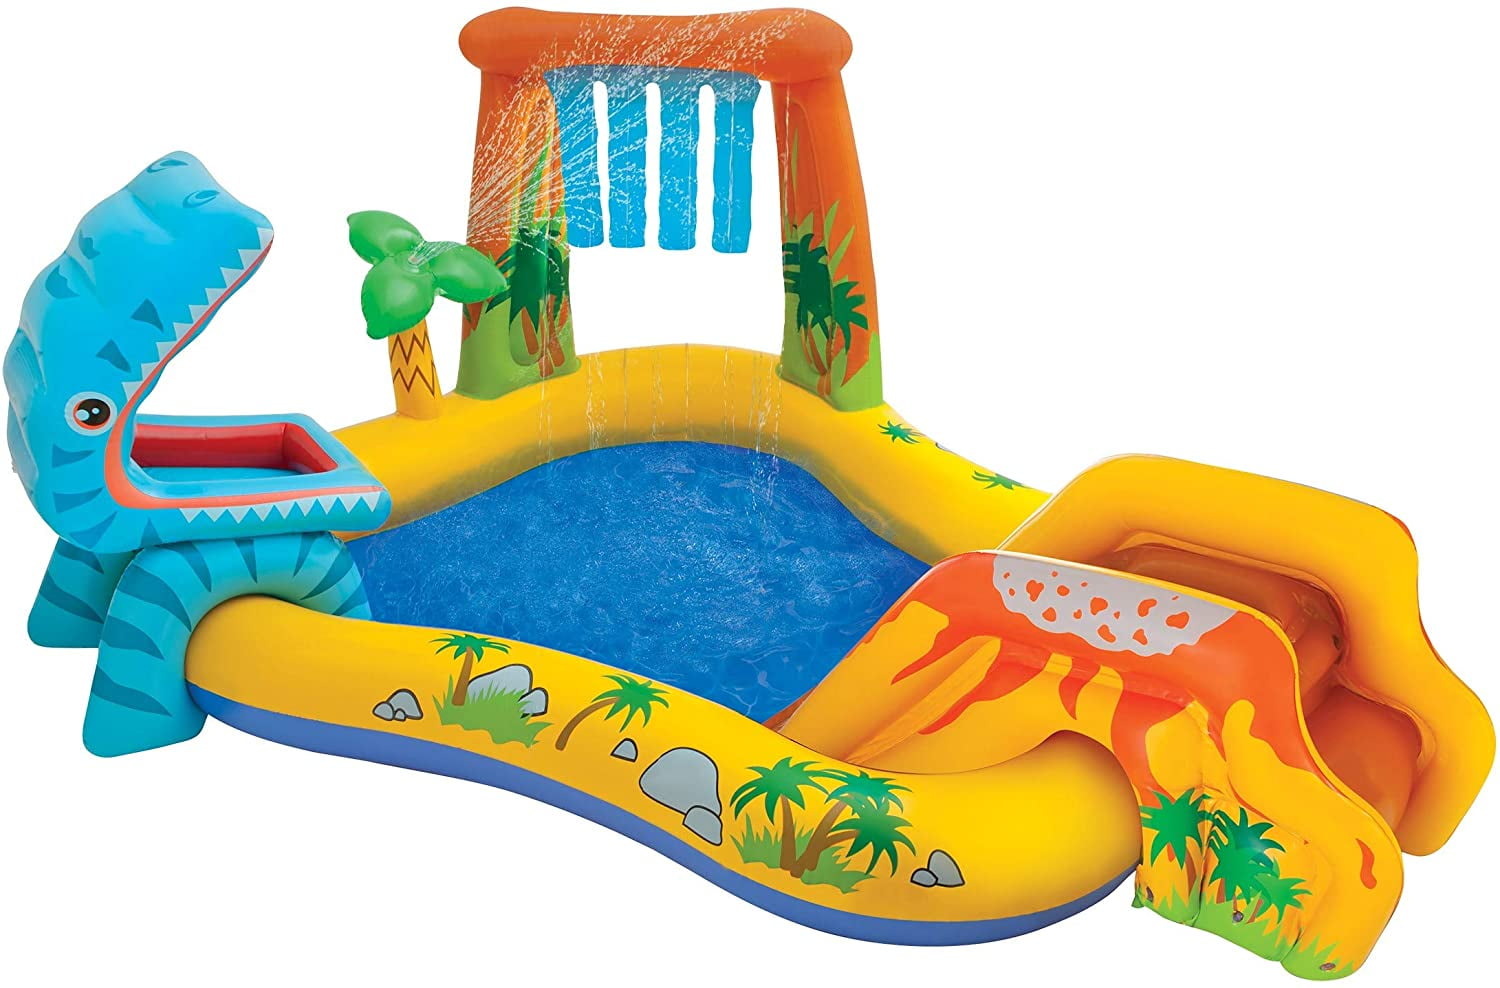 prieel enthousiast Speels Intex Dinosaur Inflatable Play Center, 98in X 75in X 43in, for Ages 2+ -  Walmart.com